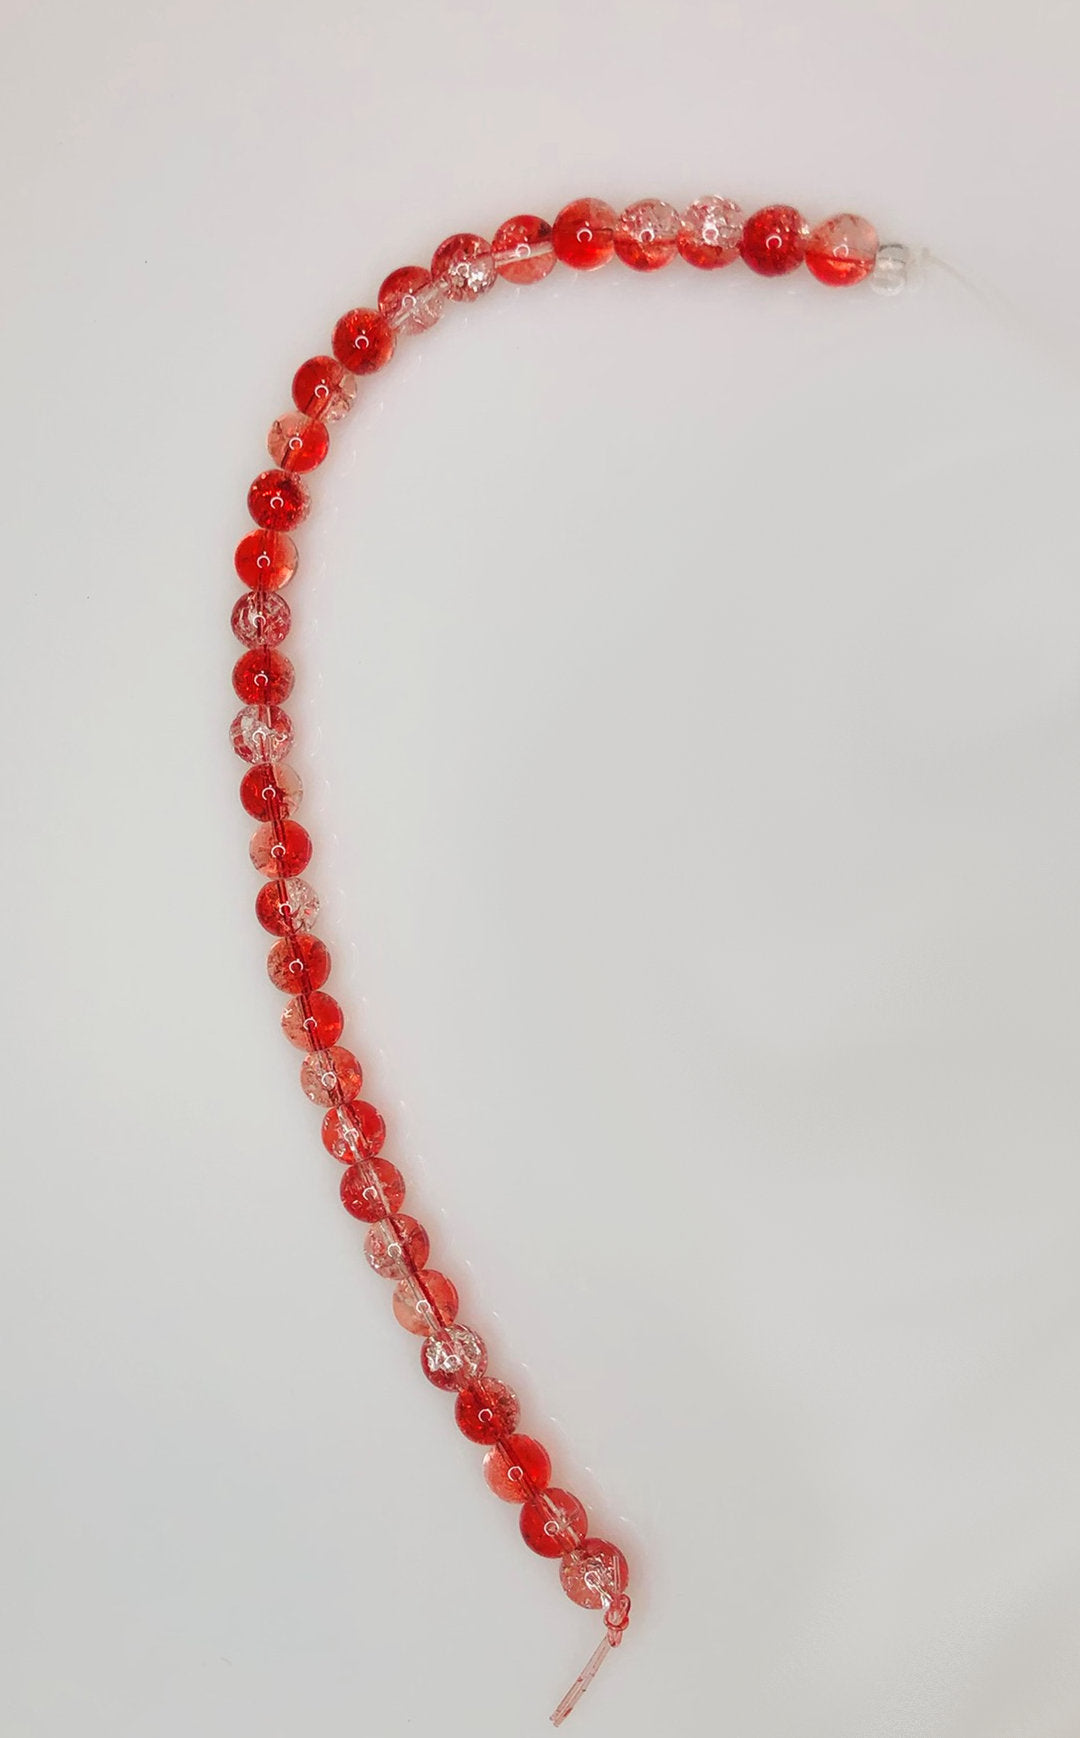 Blue Moon Transparent Red Crackle Glass Round Beads, 6 mm - 30 Beads